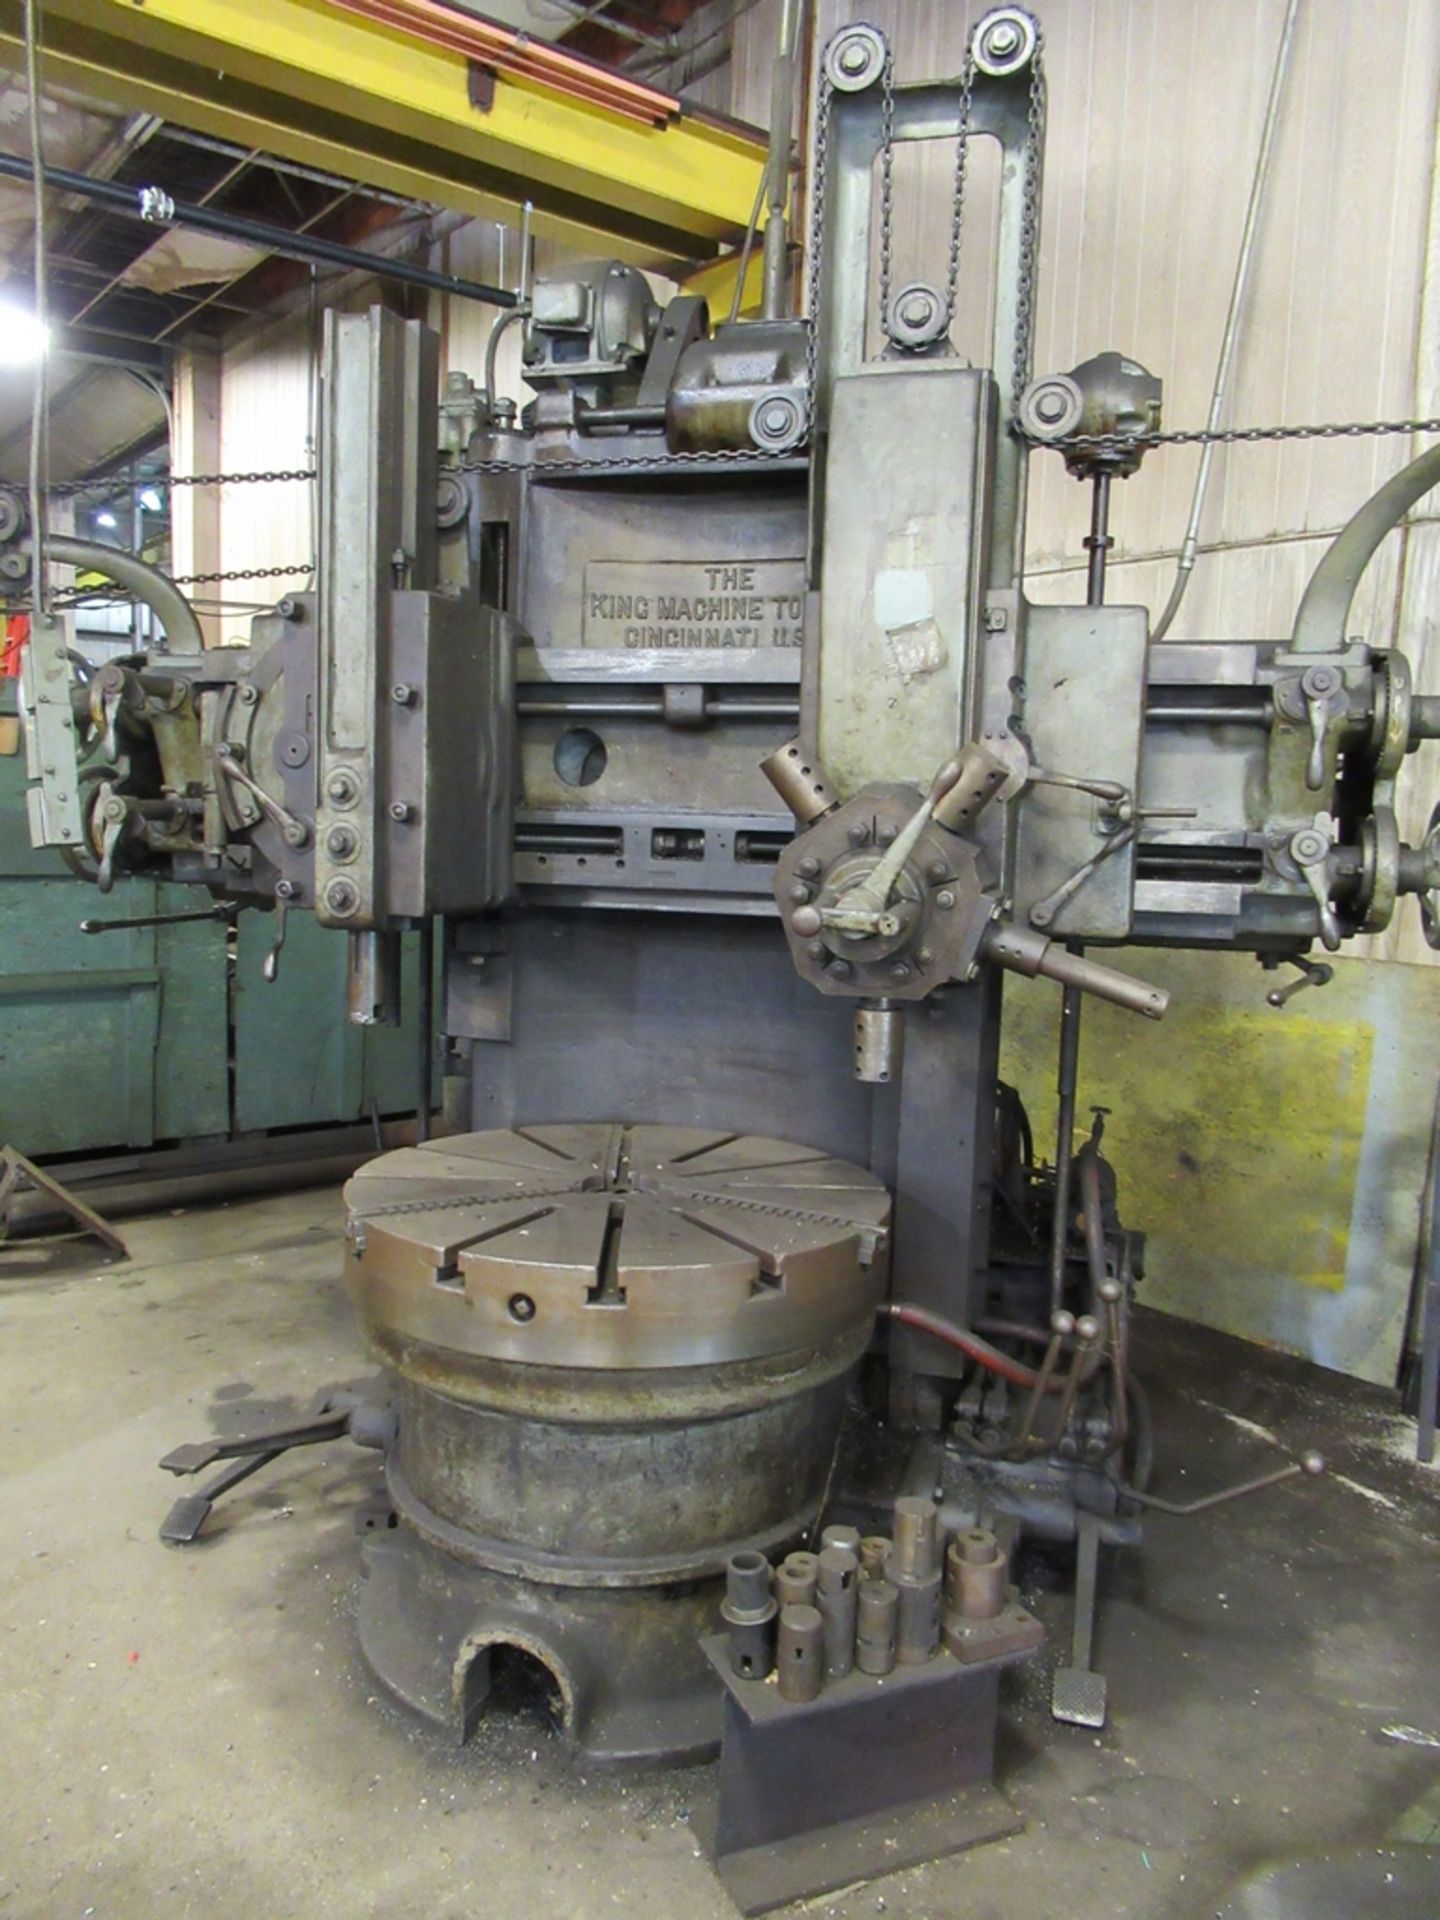 KING 42” VERTICAL BORING MILL, S/N 60222, 3-JAW CHUCK TABLE, WITH TURRET HEAD, SIDE HEAD, PENDANT